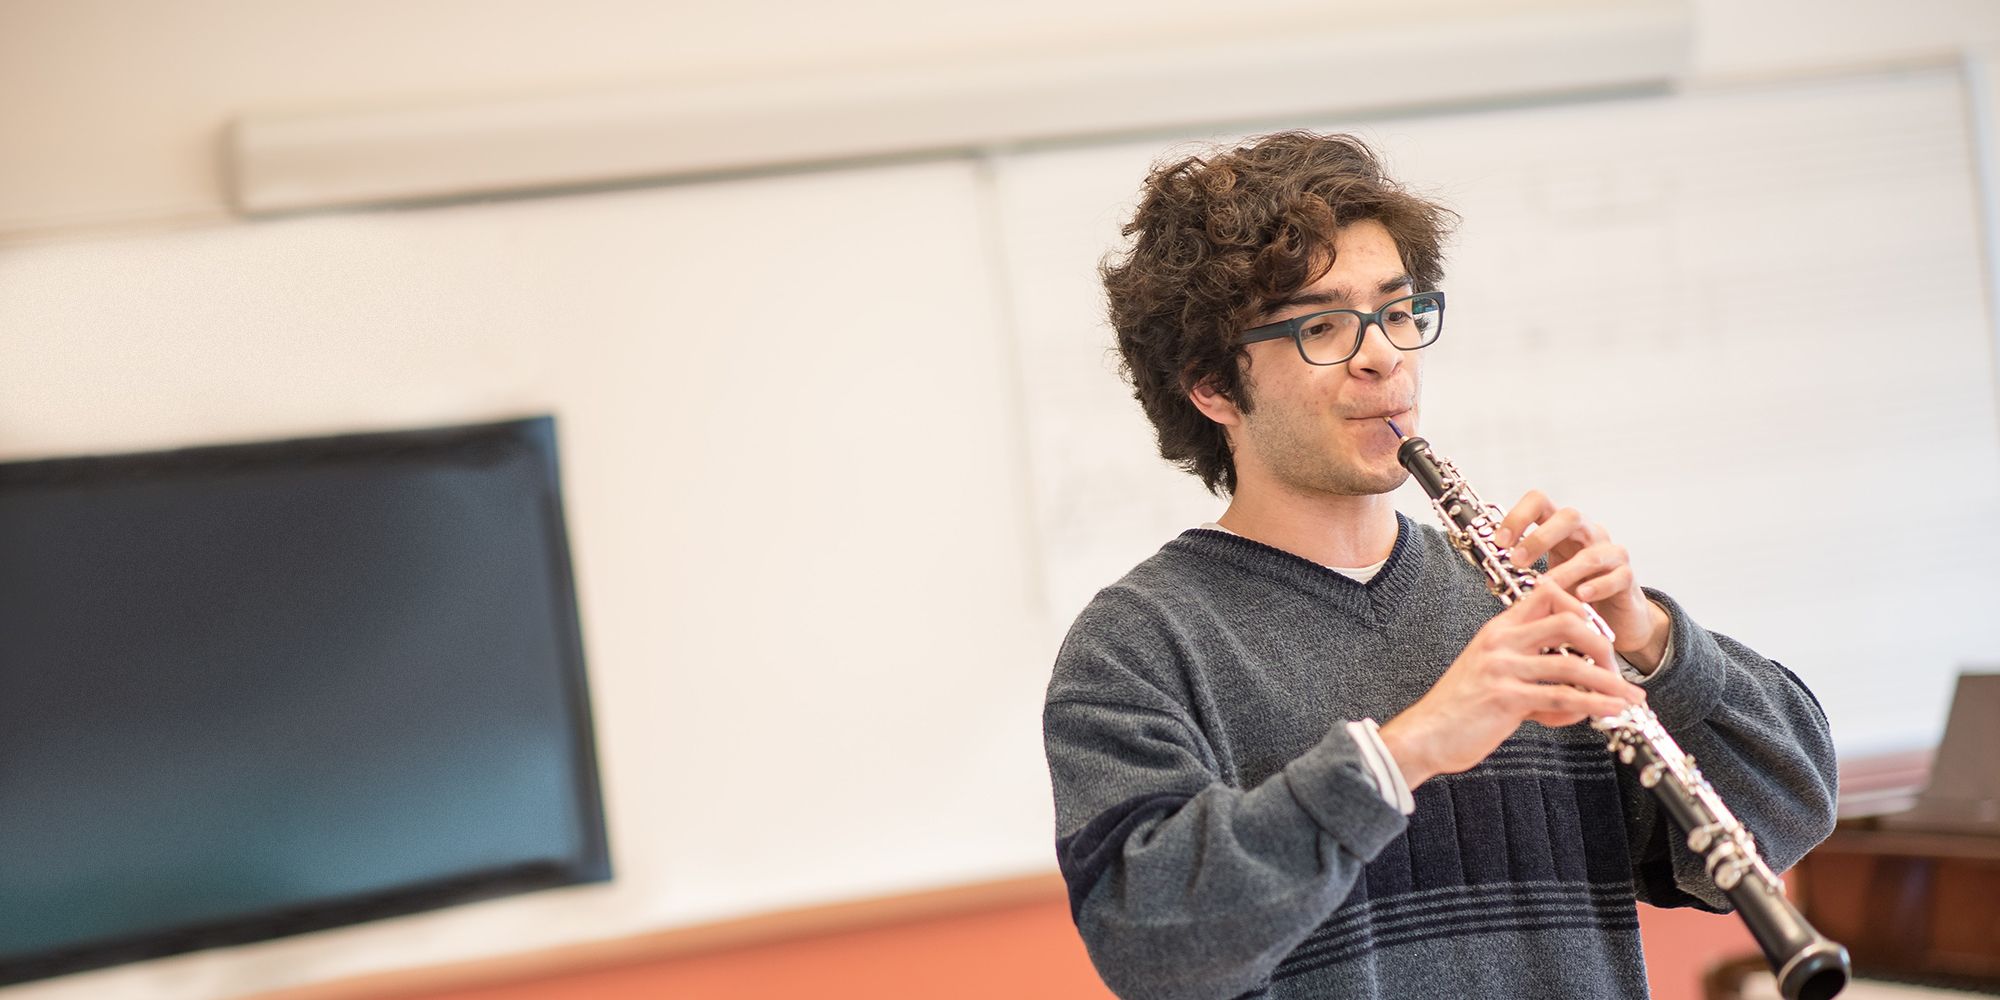 Oboe: a man in a grey sweater plays in the oboe in the front of a classroom